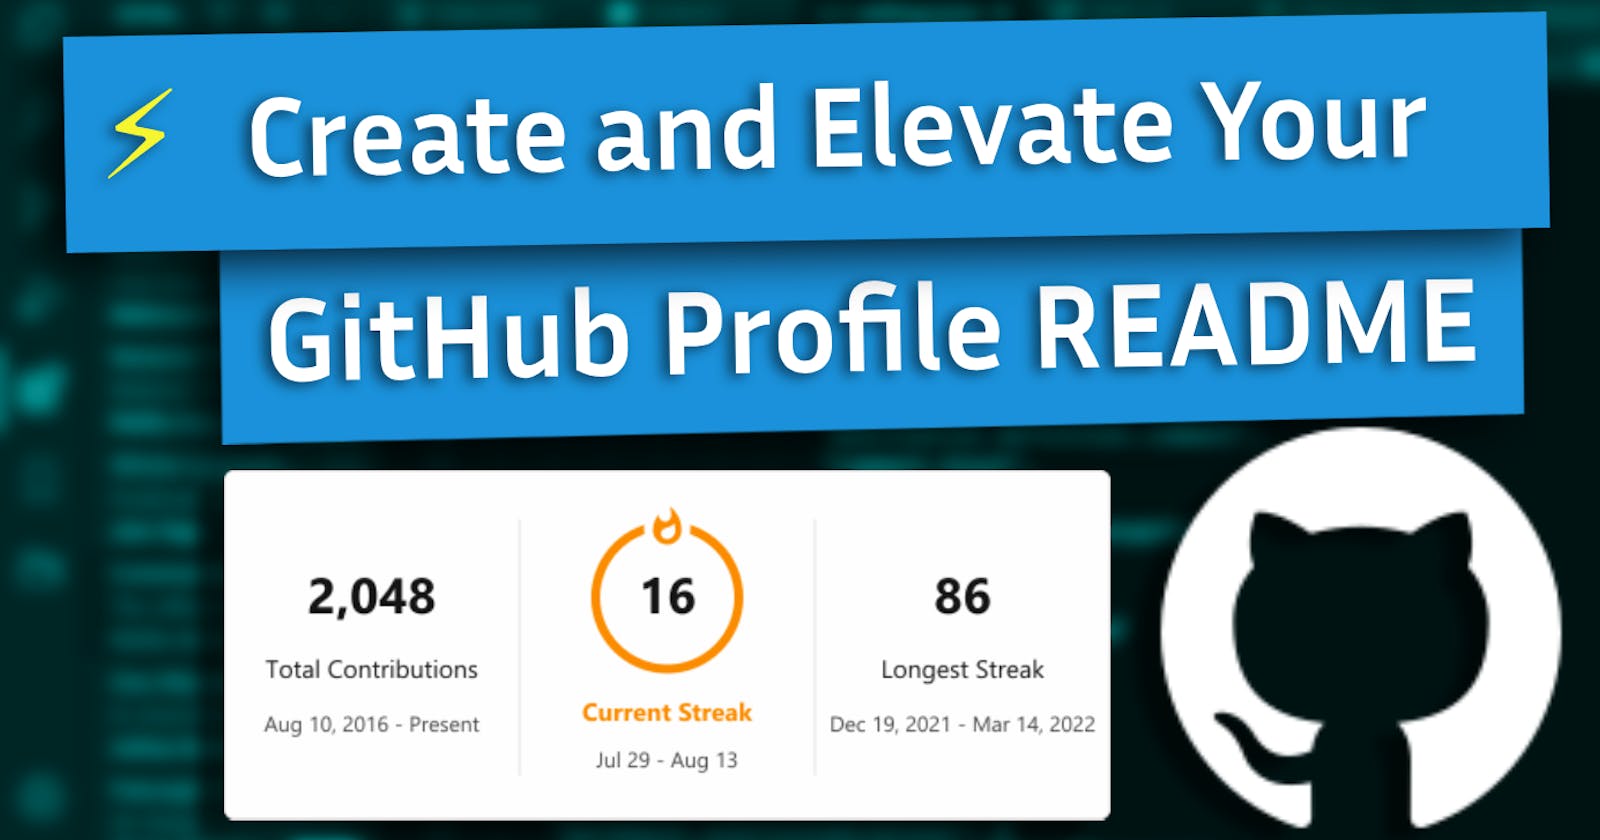 Create and Elevate Your GitHub Profile README